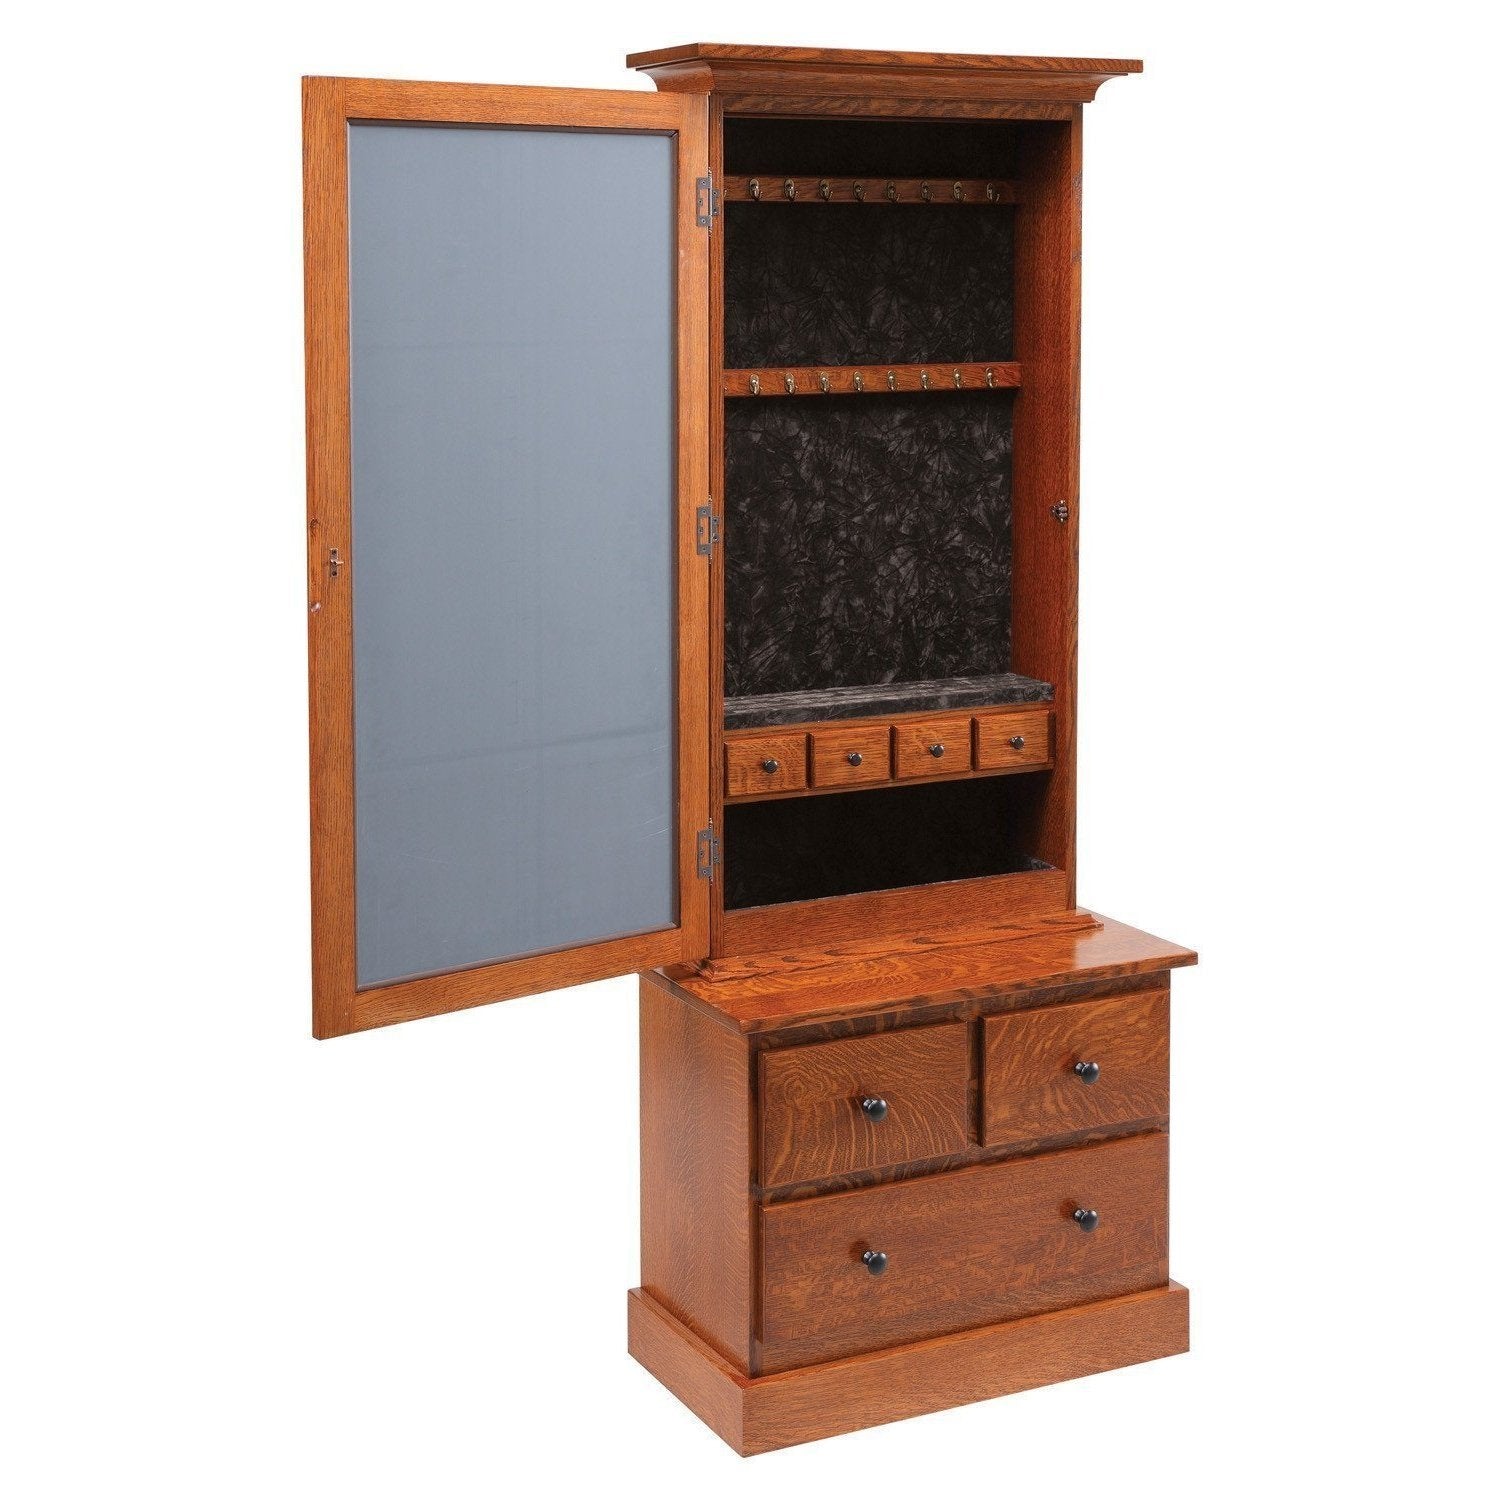 Weston Shaker Jewelry Armoire-Bedroom-The Amish House